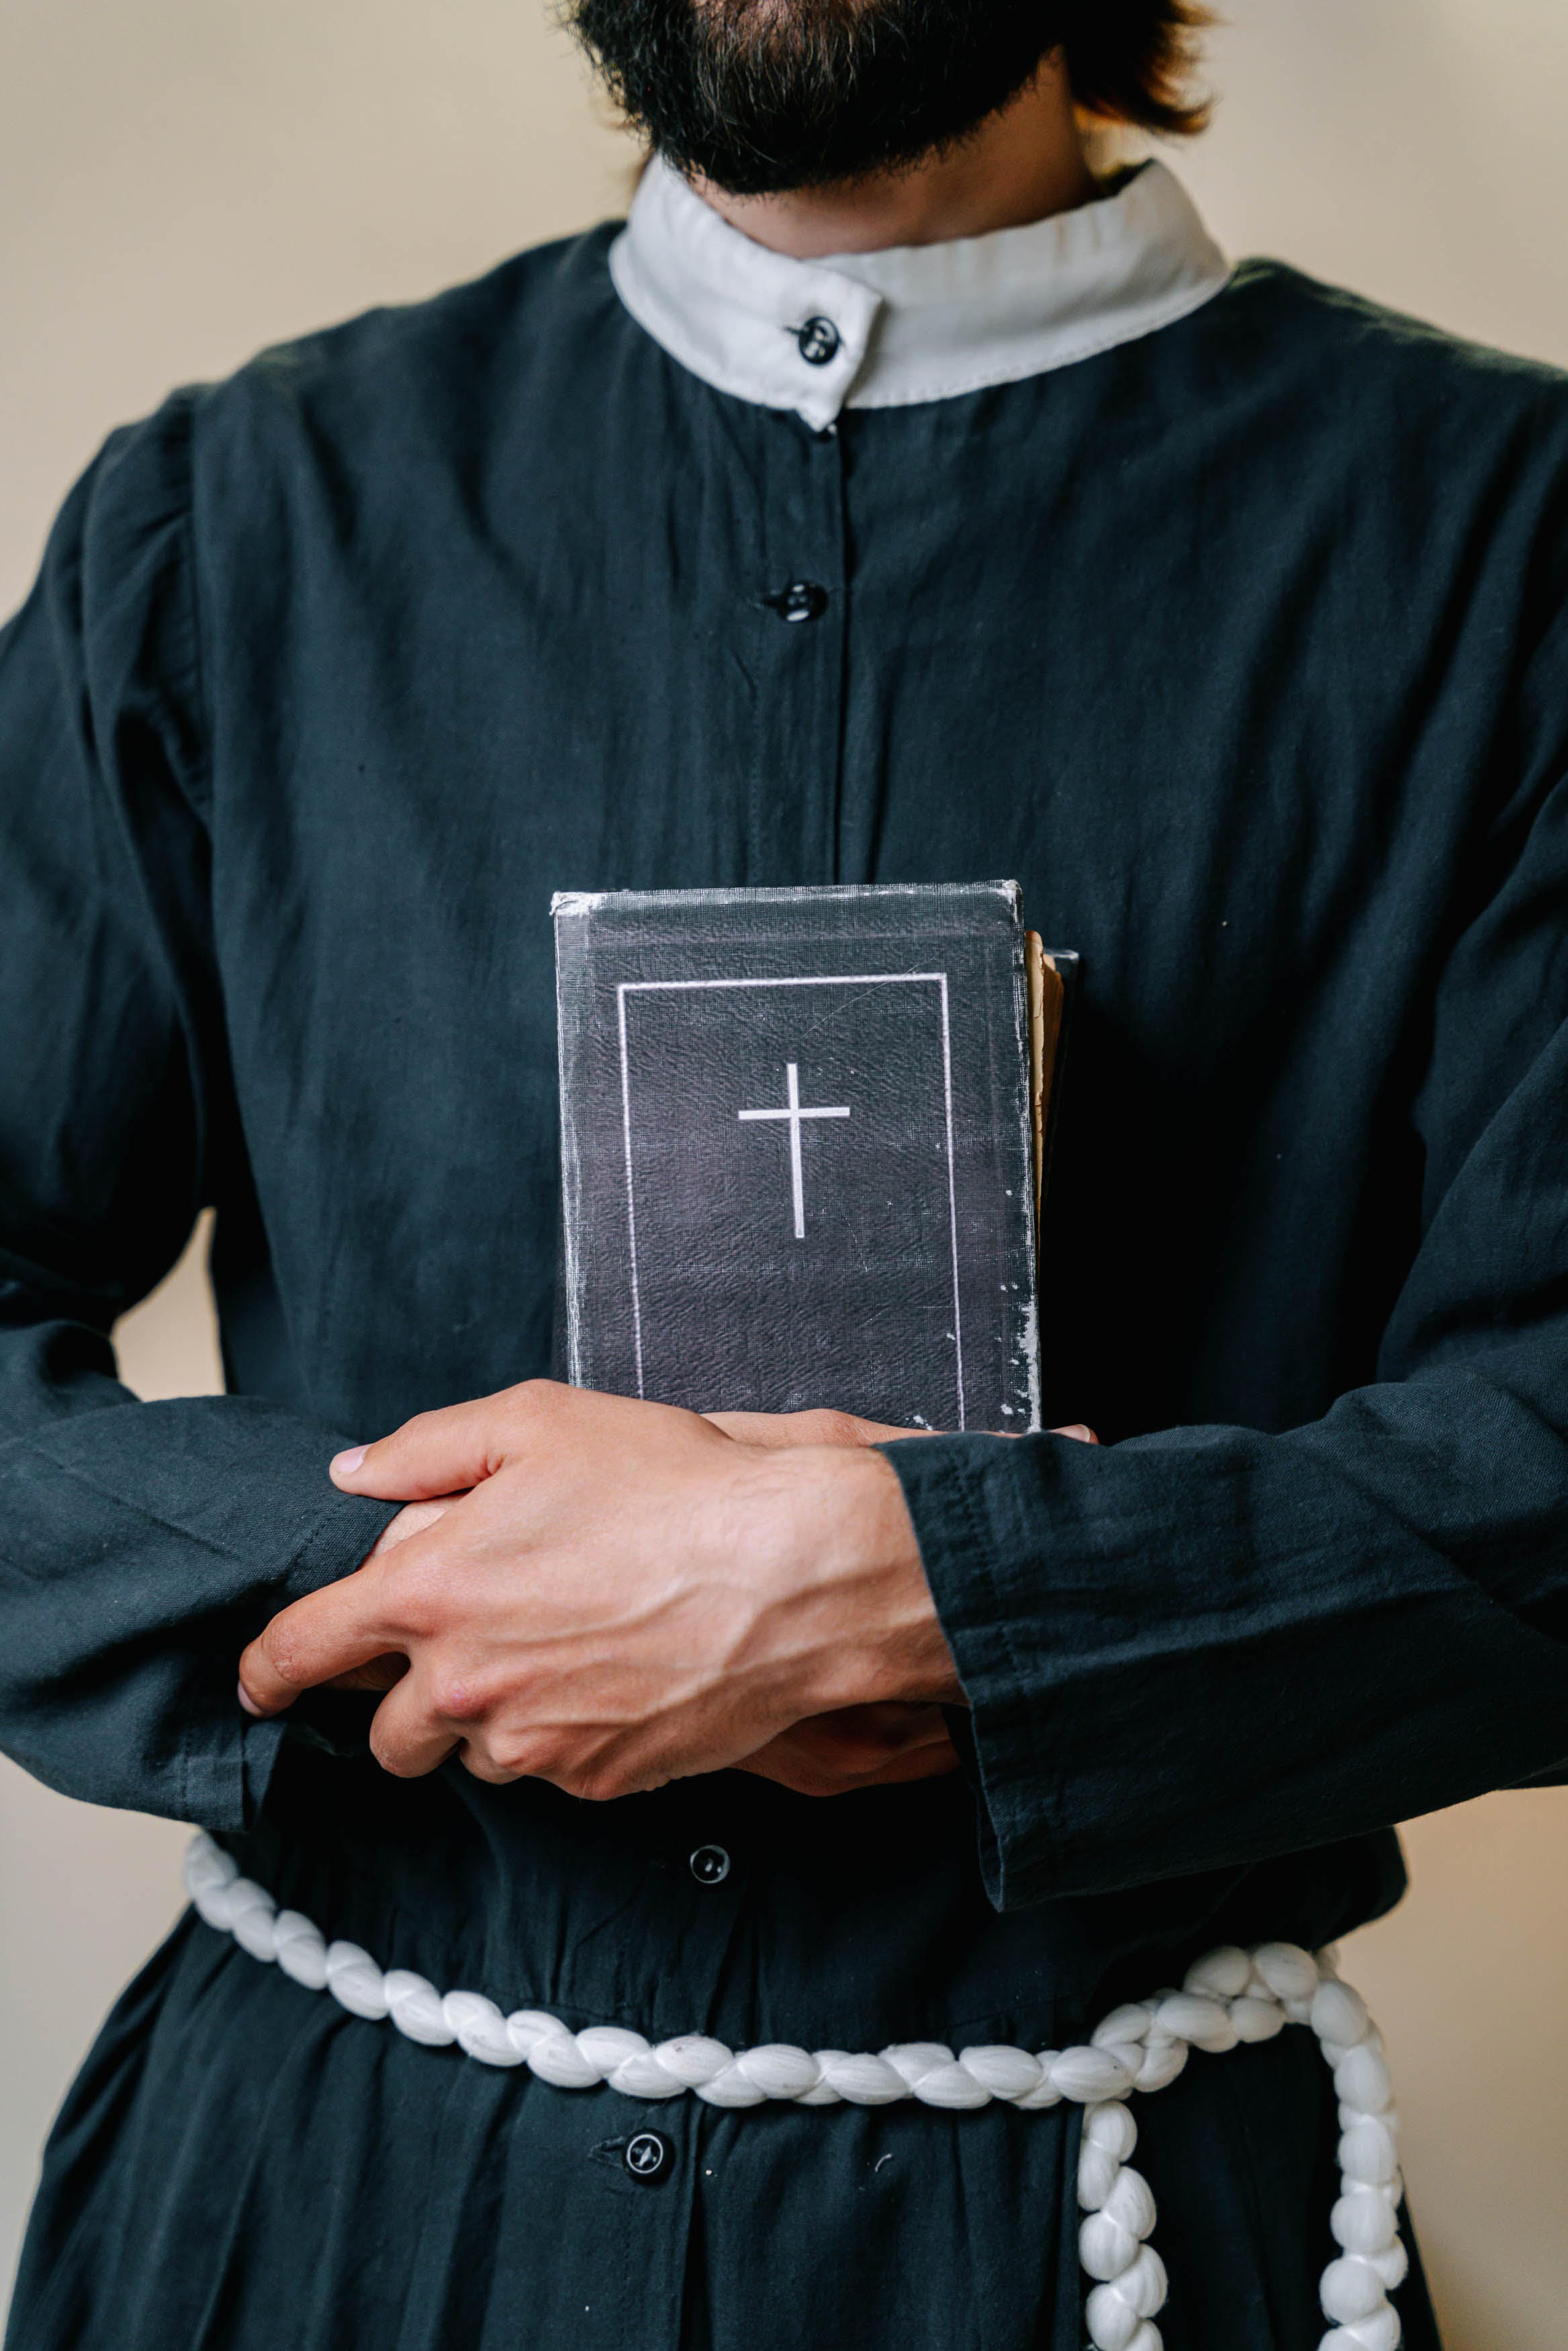 A man wearing a cassock holding a Holy Bible. | Source: Pexels